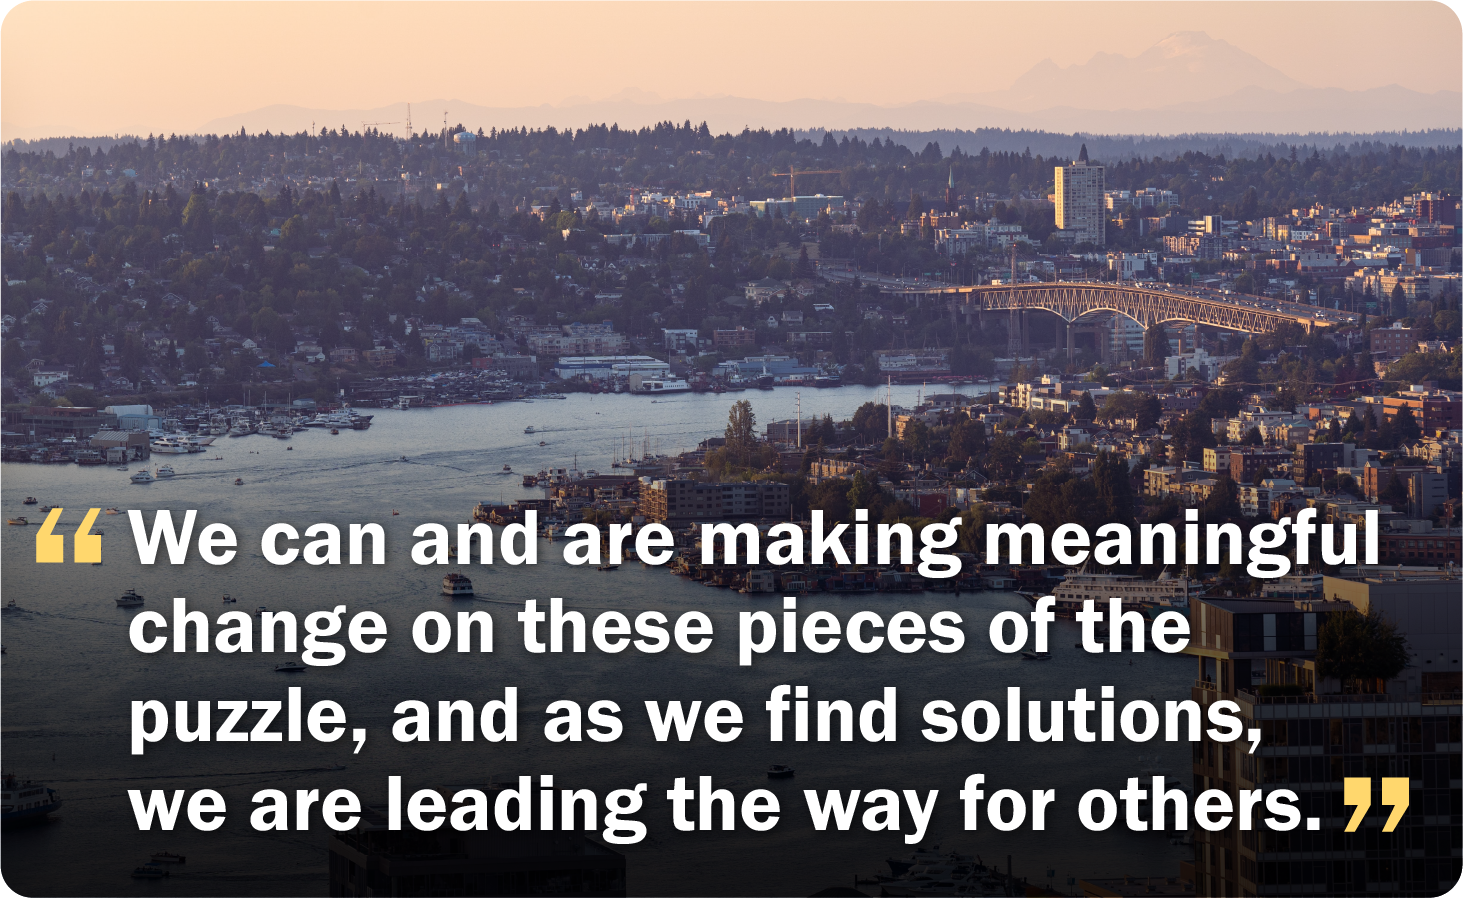 Seattle cityscape with a text overlay "We can and are making meaningful change on these pieces of the puzzle"